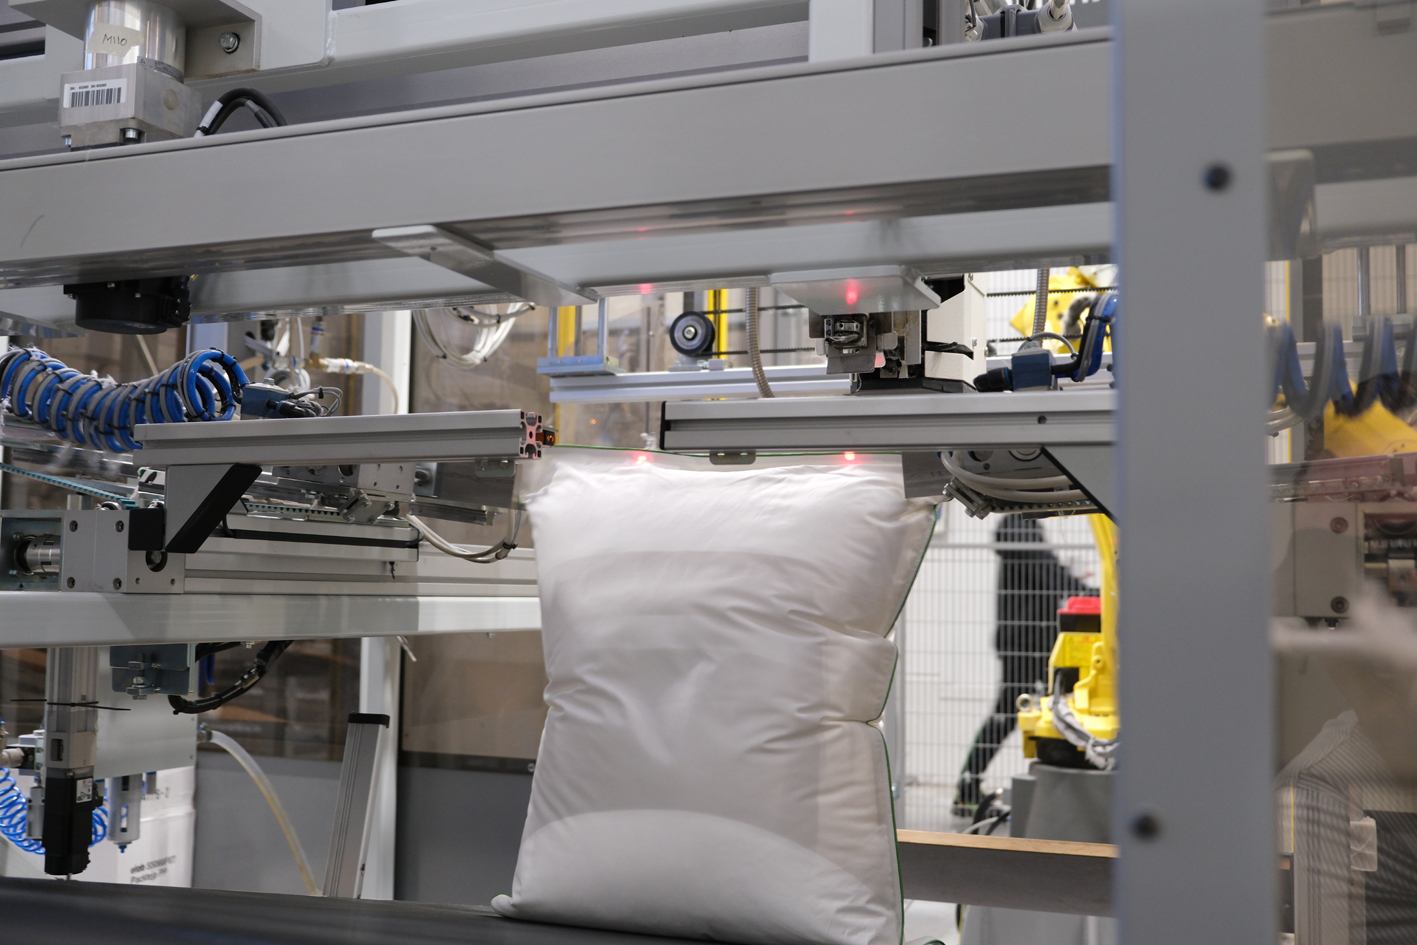 The line configuration enables the completely seamless fibre handling, filling, sewing and packing of pillows. © Värnamo